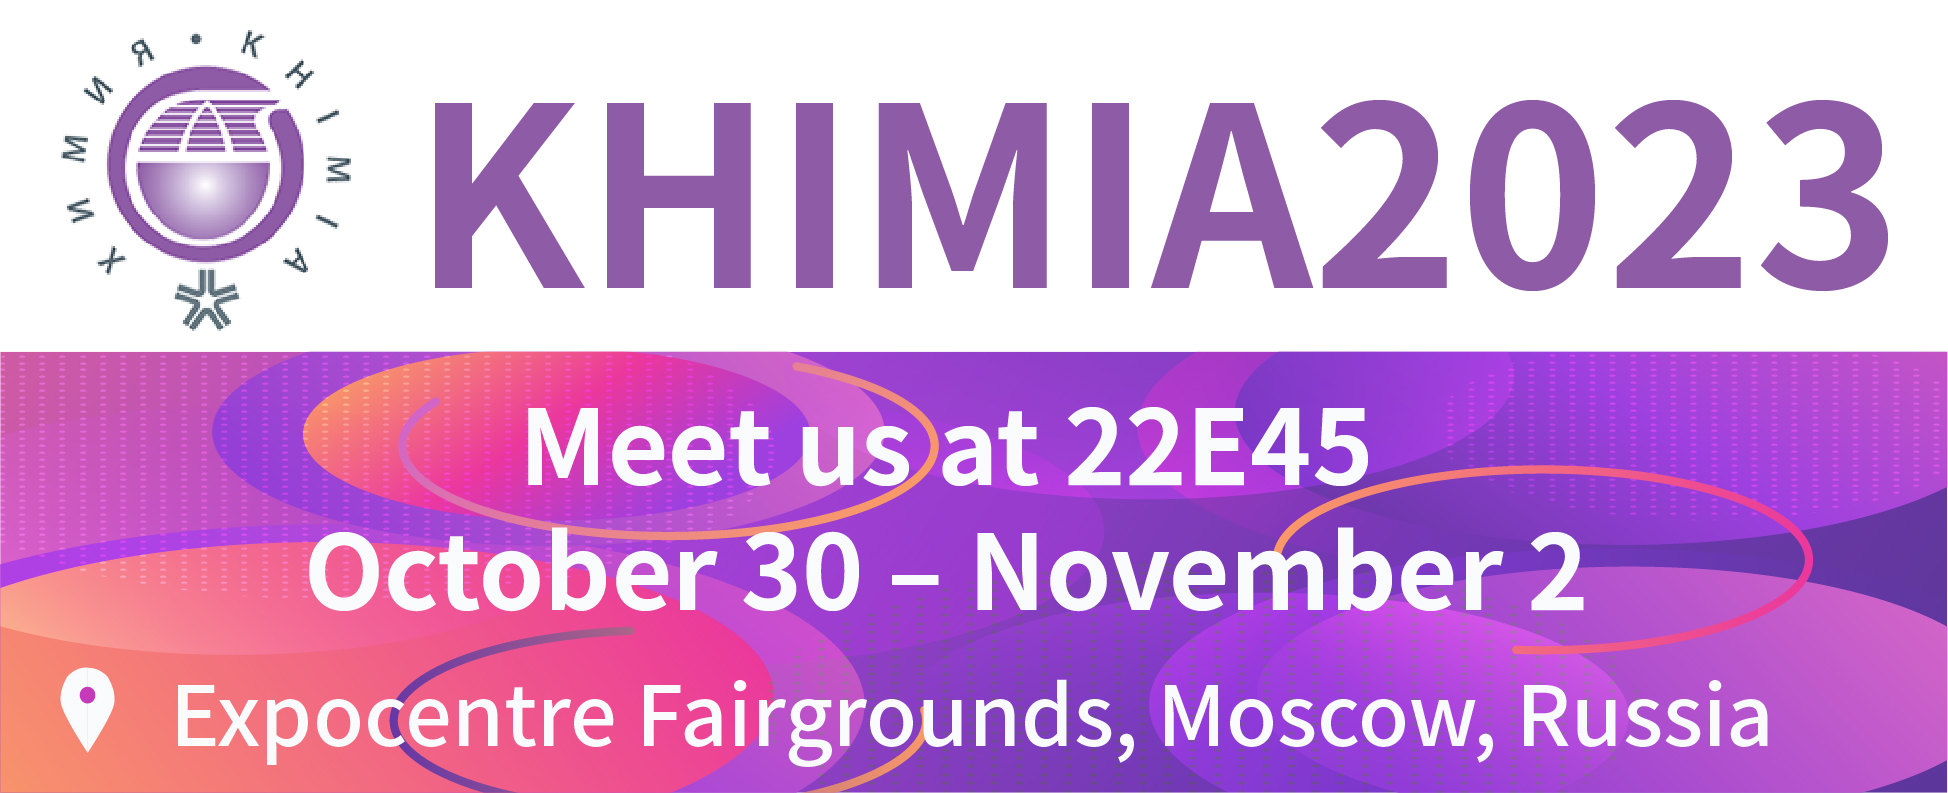 Welcome To Visit Us In the KHIMIA 2023